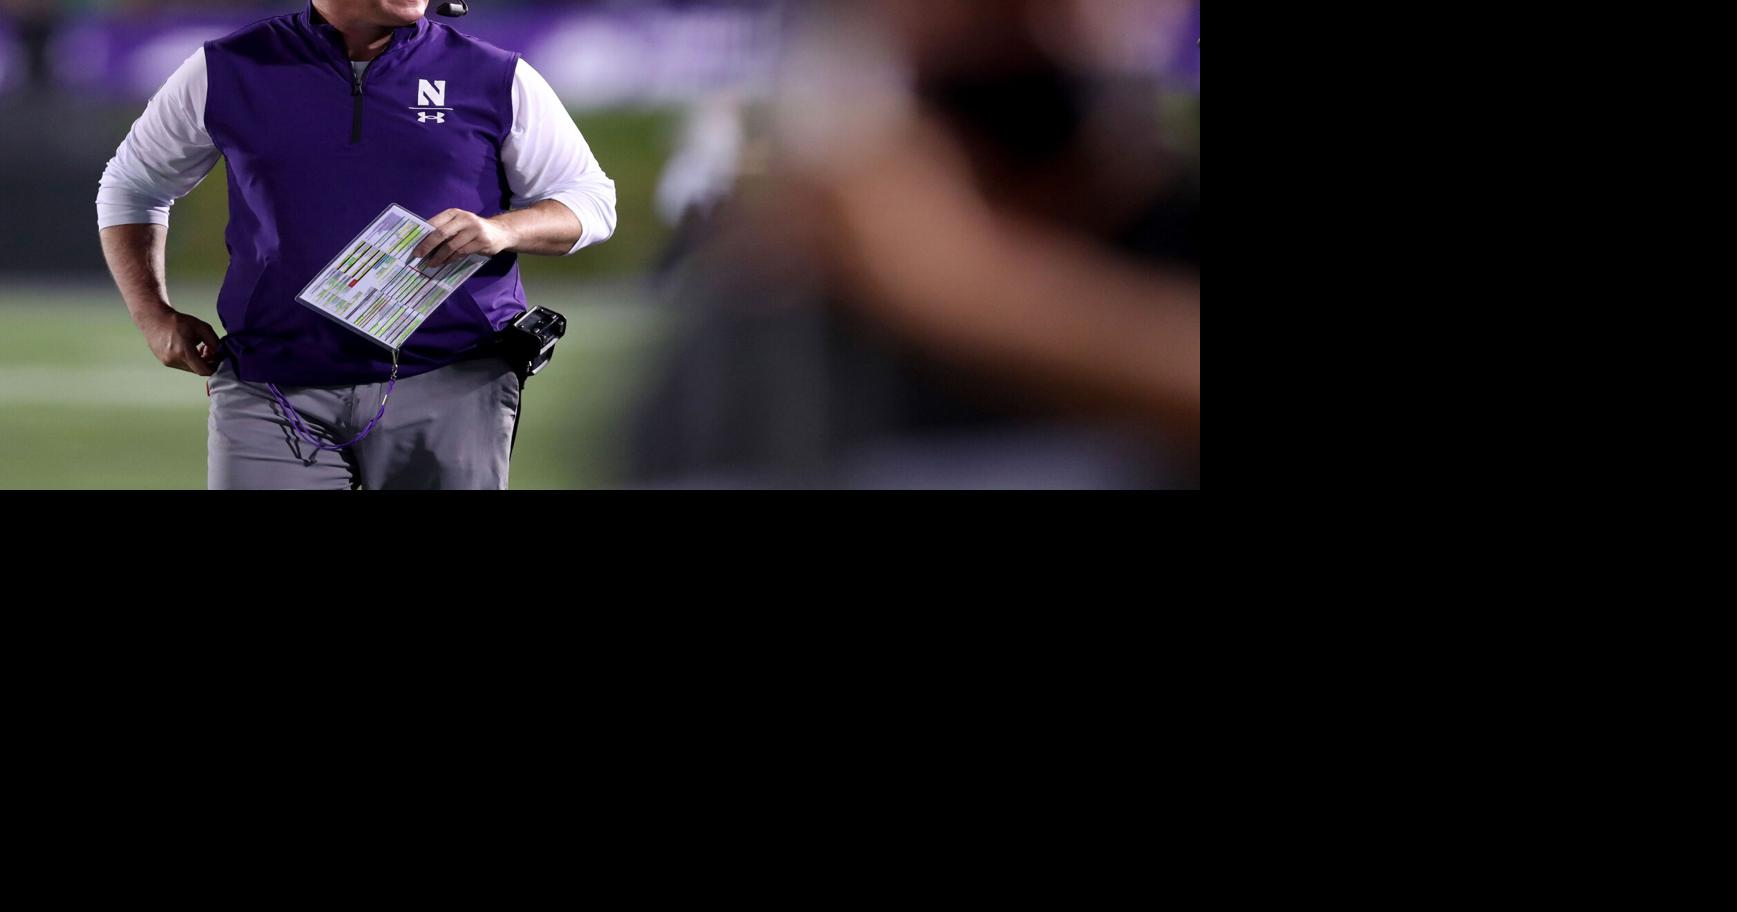 Northwestern baseball coach fired days after football coach terminated in  hazing scandal